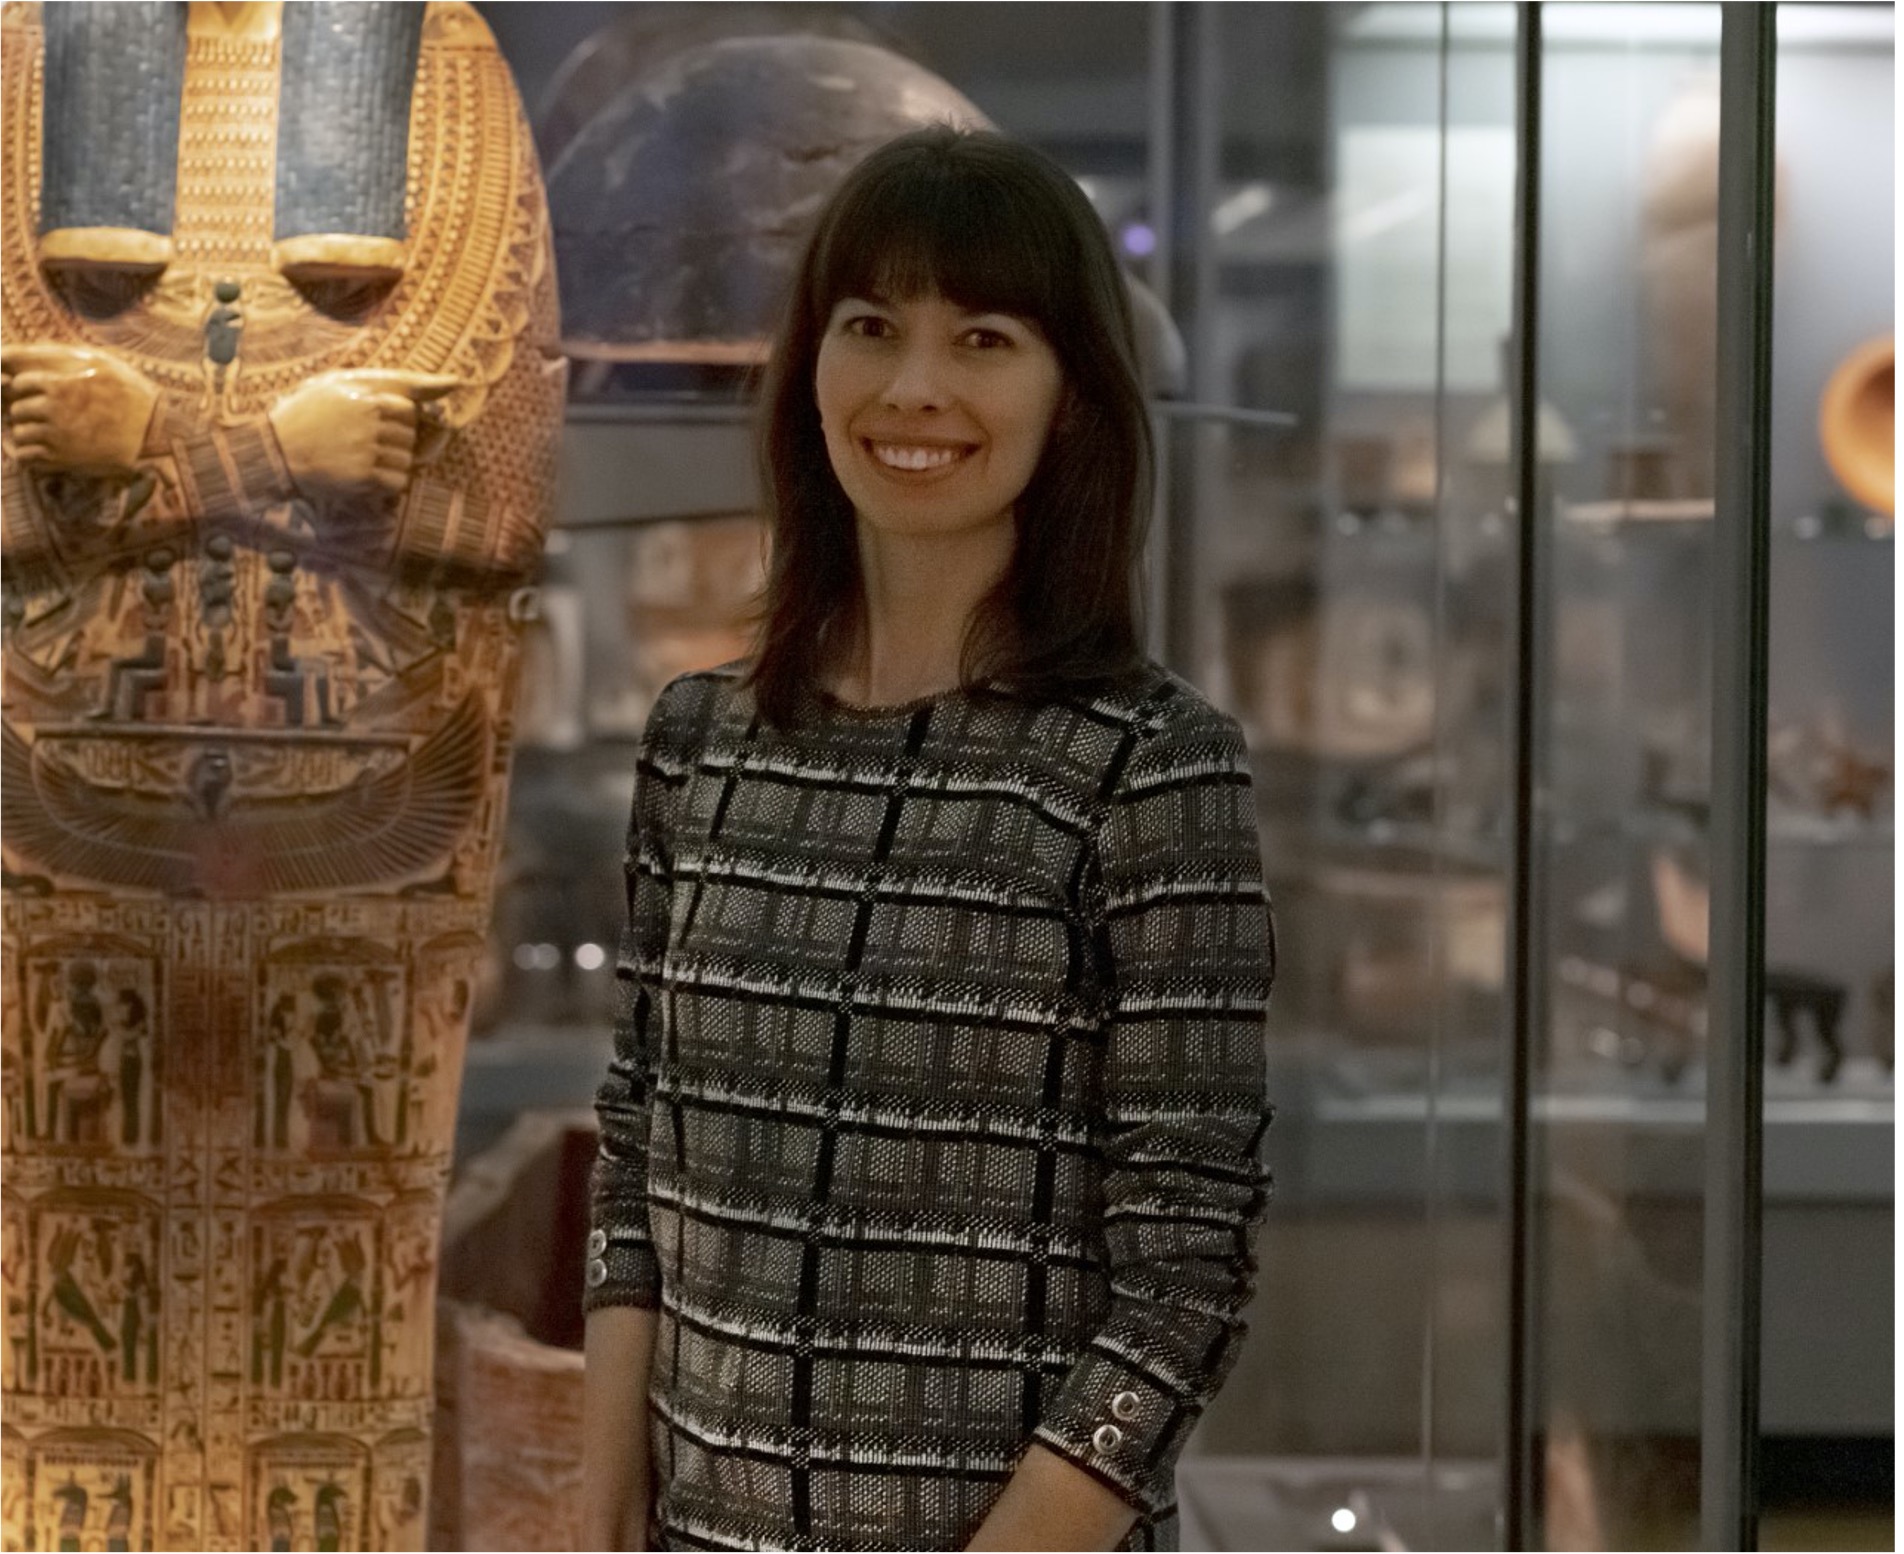 A woman smiling at the camera in front of a museum display of ancient Egyptian antiquities 